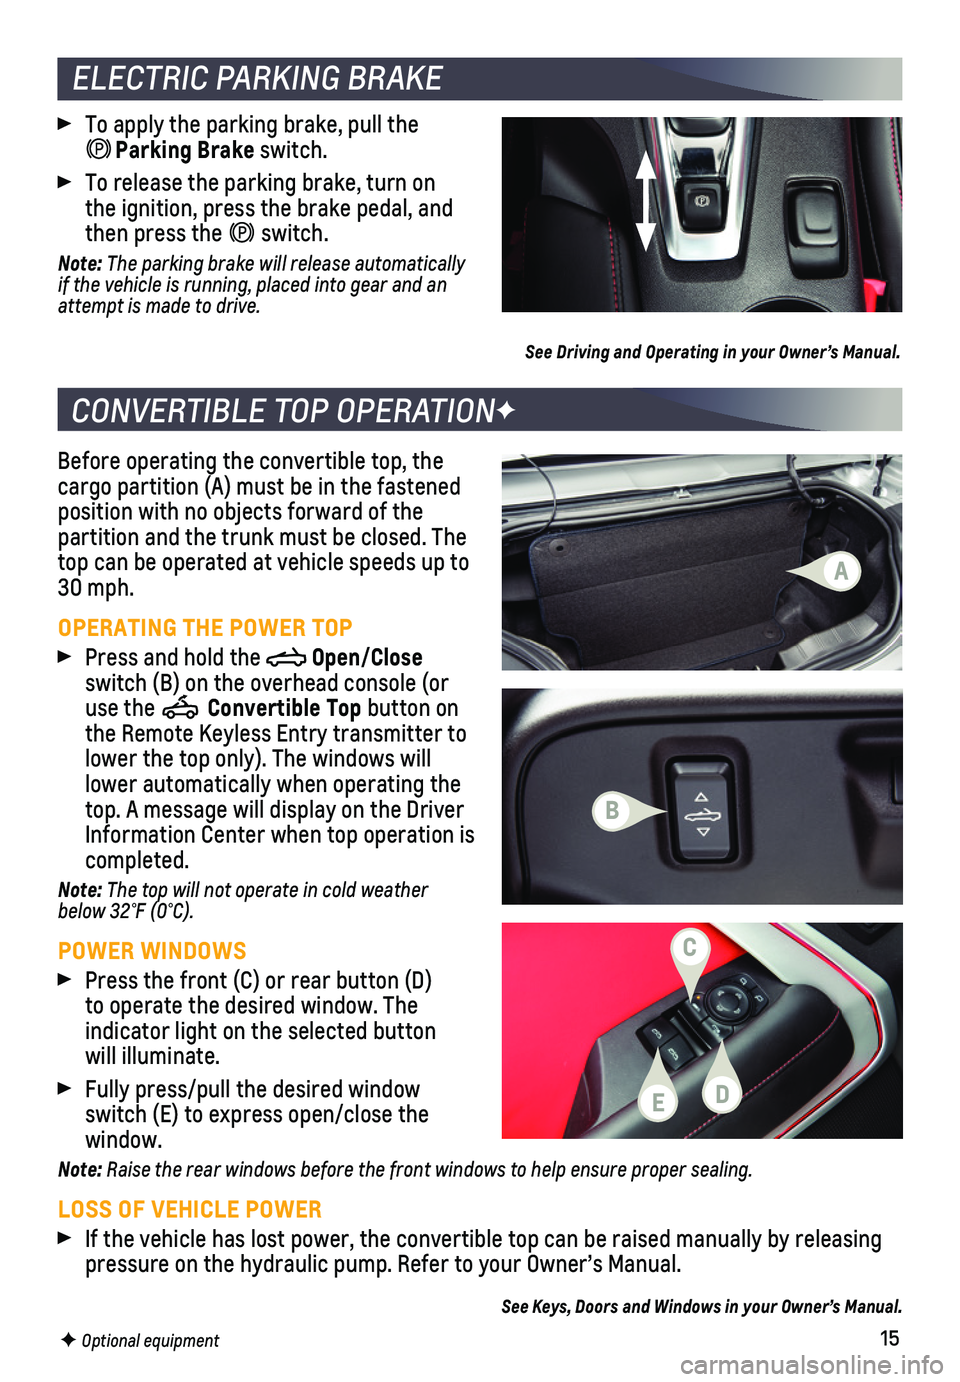 CHEVROLET CAMARO 2018  Get To Know Guide 15
Before operating the convertible top, the cargo partition (A) must be in the fastened position with no objects forward of the partition and the trunk must be closed. The top can be operated at vehi